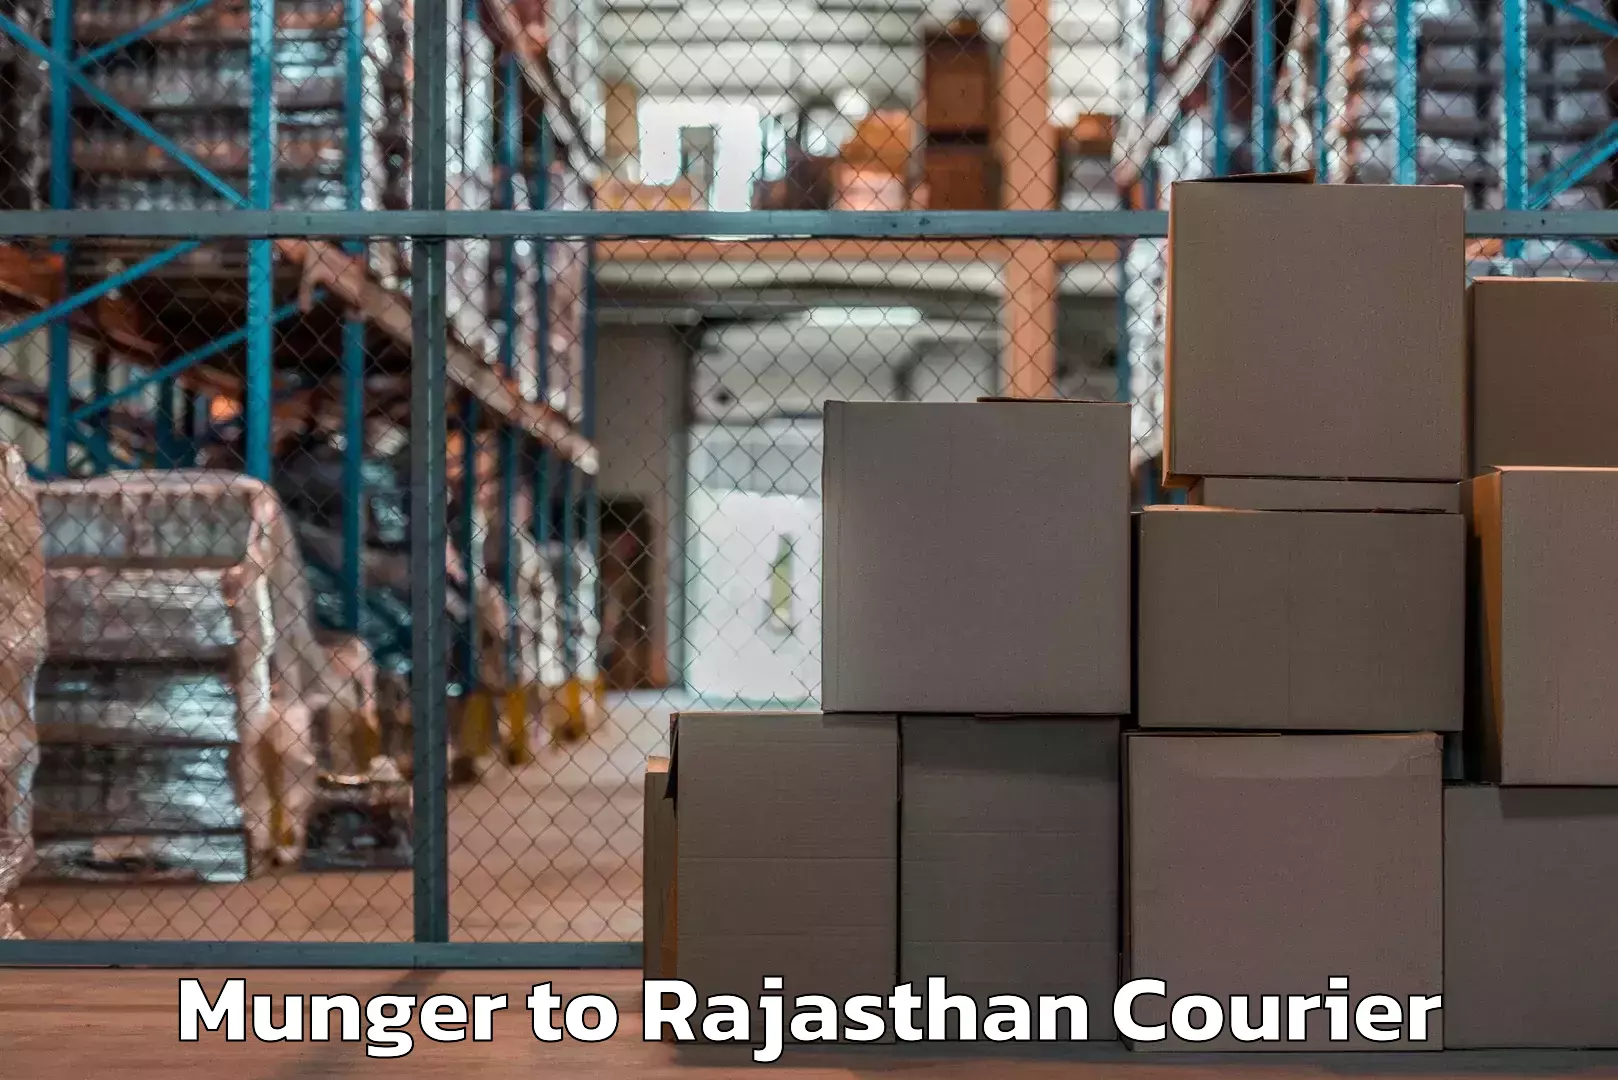 Next-day delivery options Munger to Rajasthan